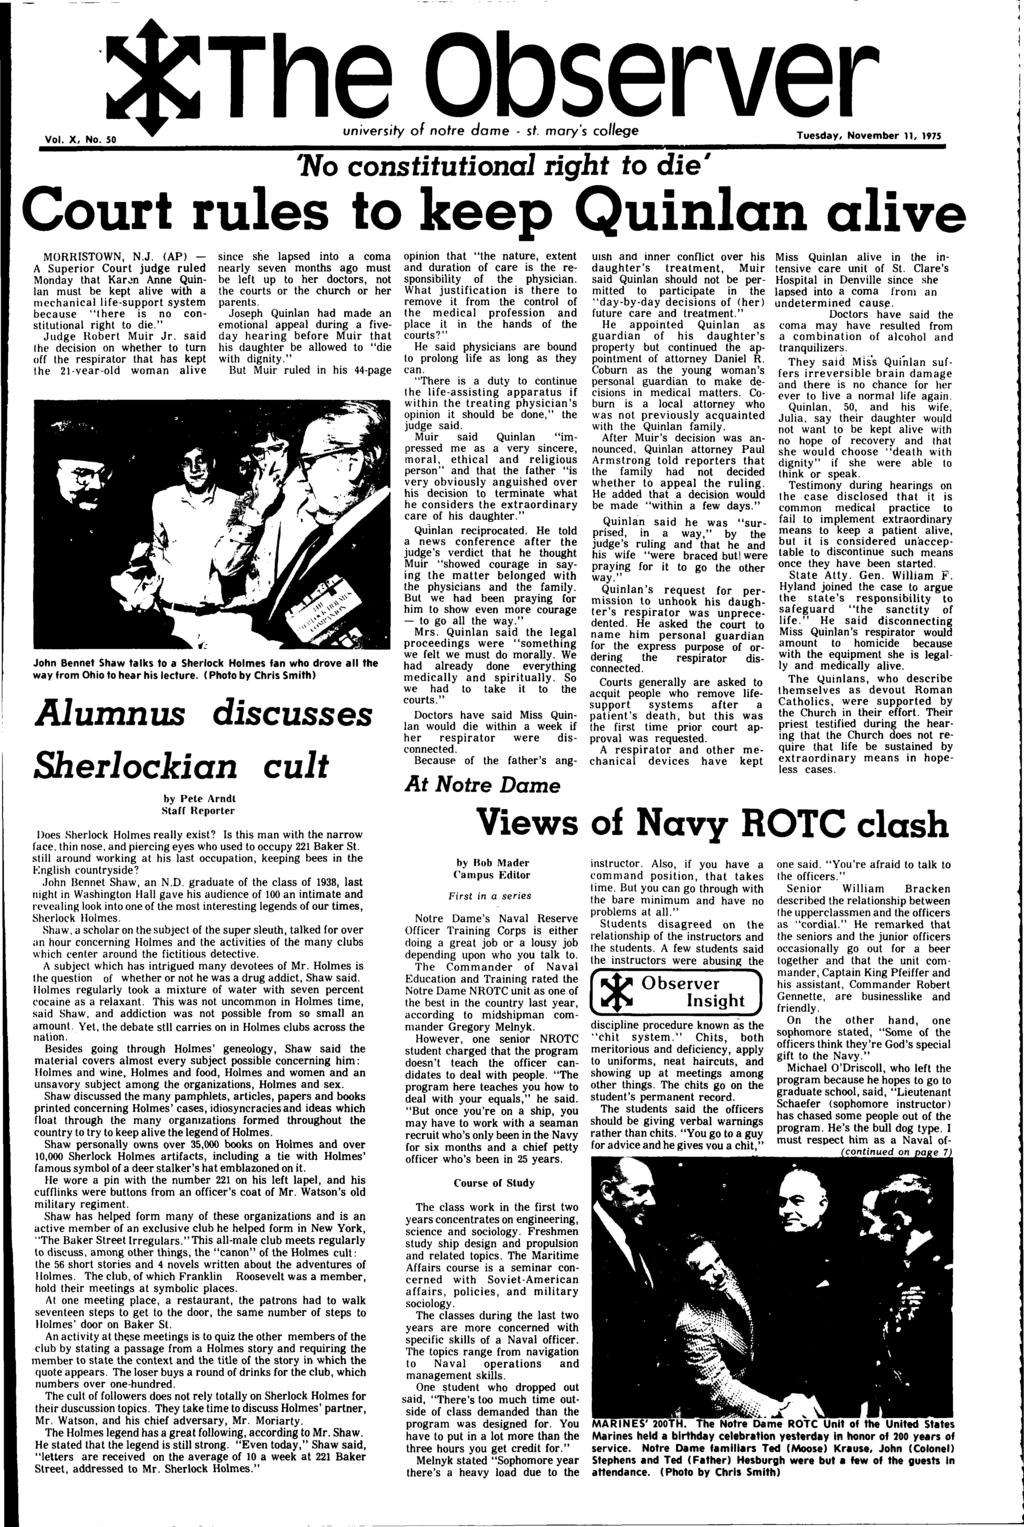 Vol. X, No. 50 server universiy of nore dome - s. mary's college Tuesday, November 11, 1975 'No consiuional righ o die' Cour rules o keep Quinlan alive MORRISTOWN, N.J.